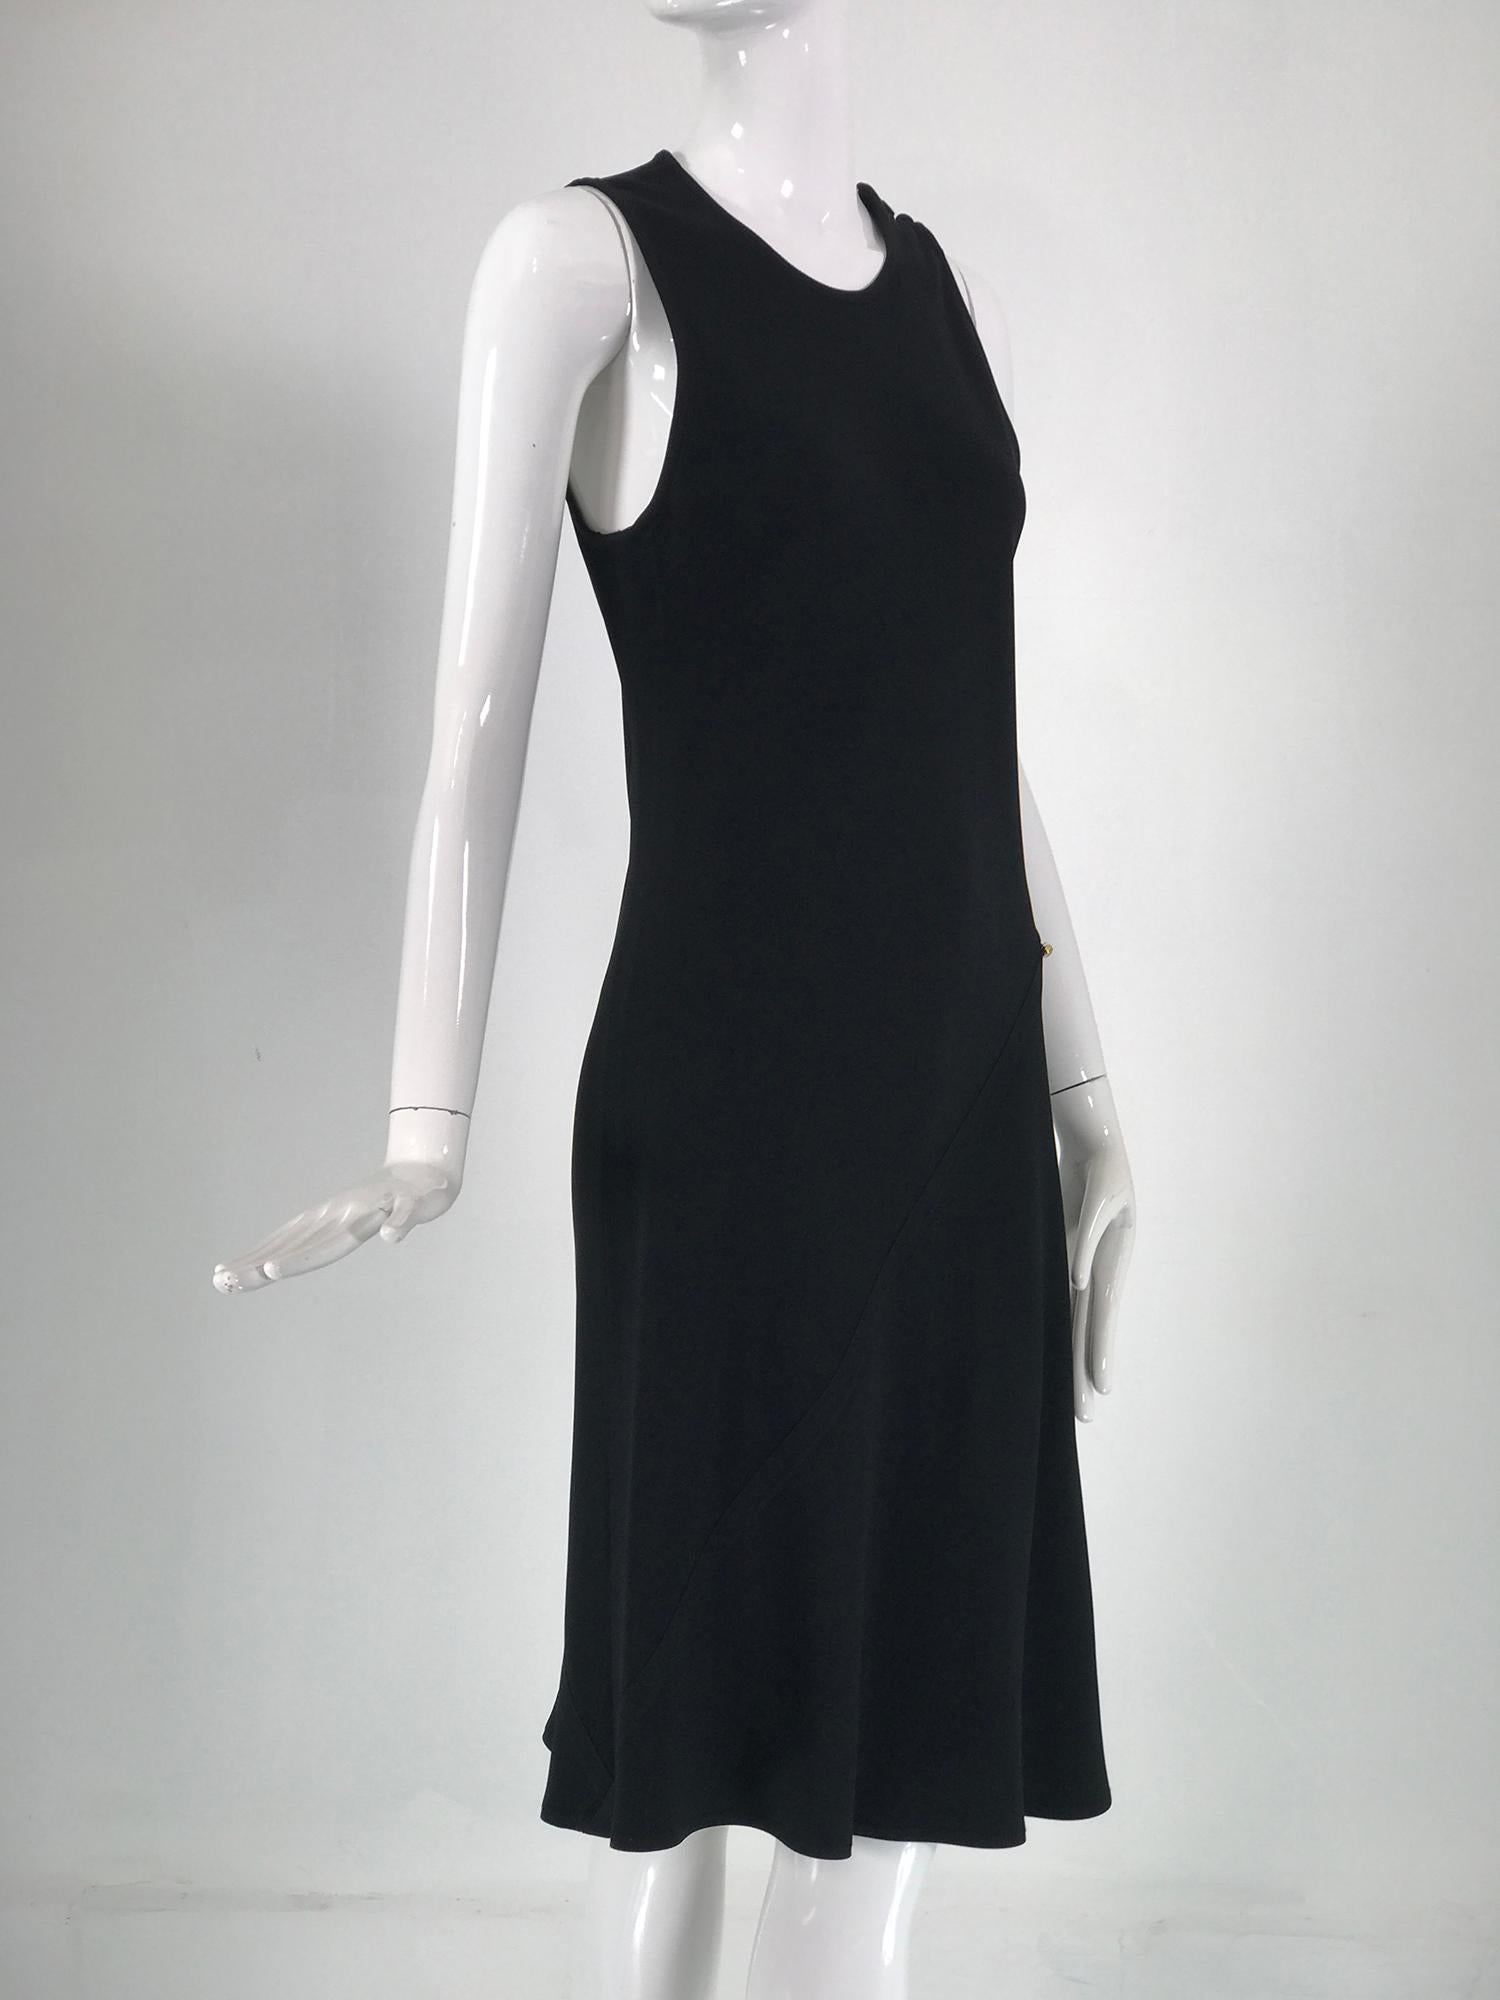 Sonia Rykiel black satin backed crepe bias cut, sleeveless dress. Jewel neck dress slips on closing at the shoulder with 3 self buttons. Deep arm openings. Two flat felled bias seams at front and back from hip to hem. There is a single rhinestone